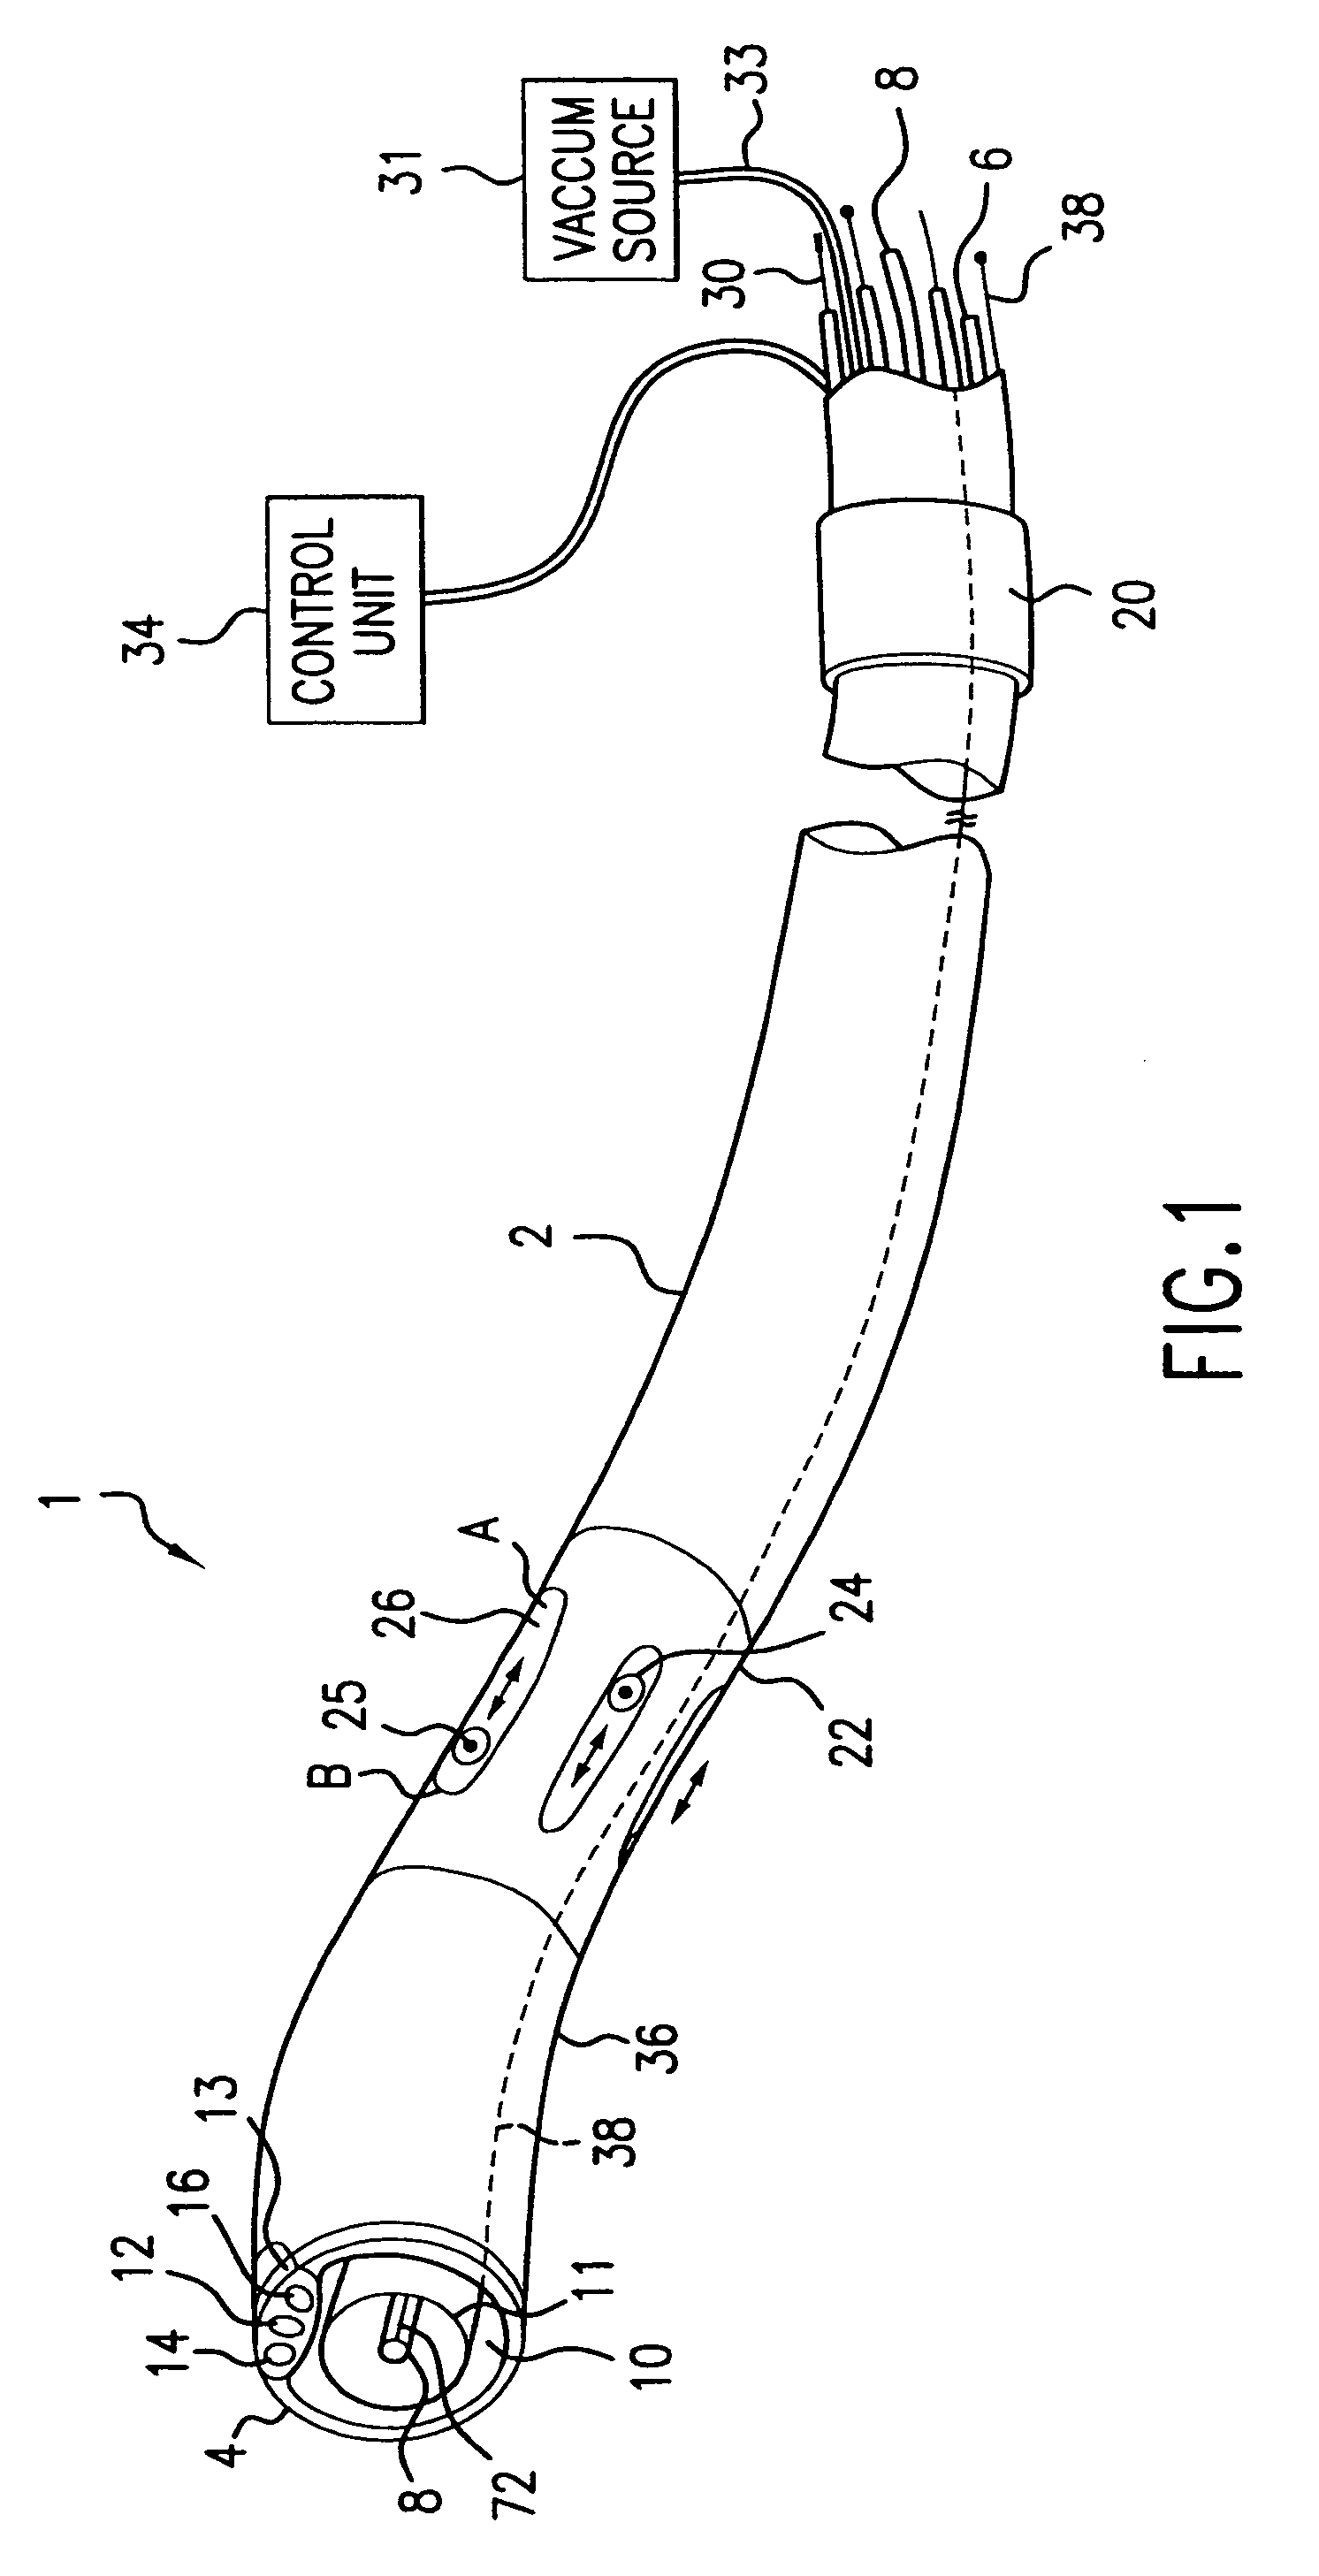 Catheter introducer system for exploration of body cavities